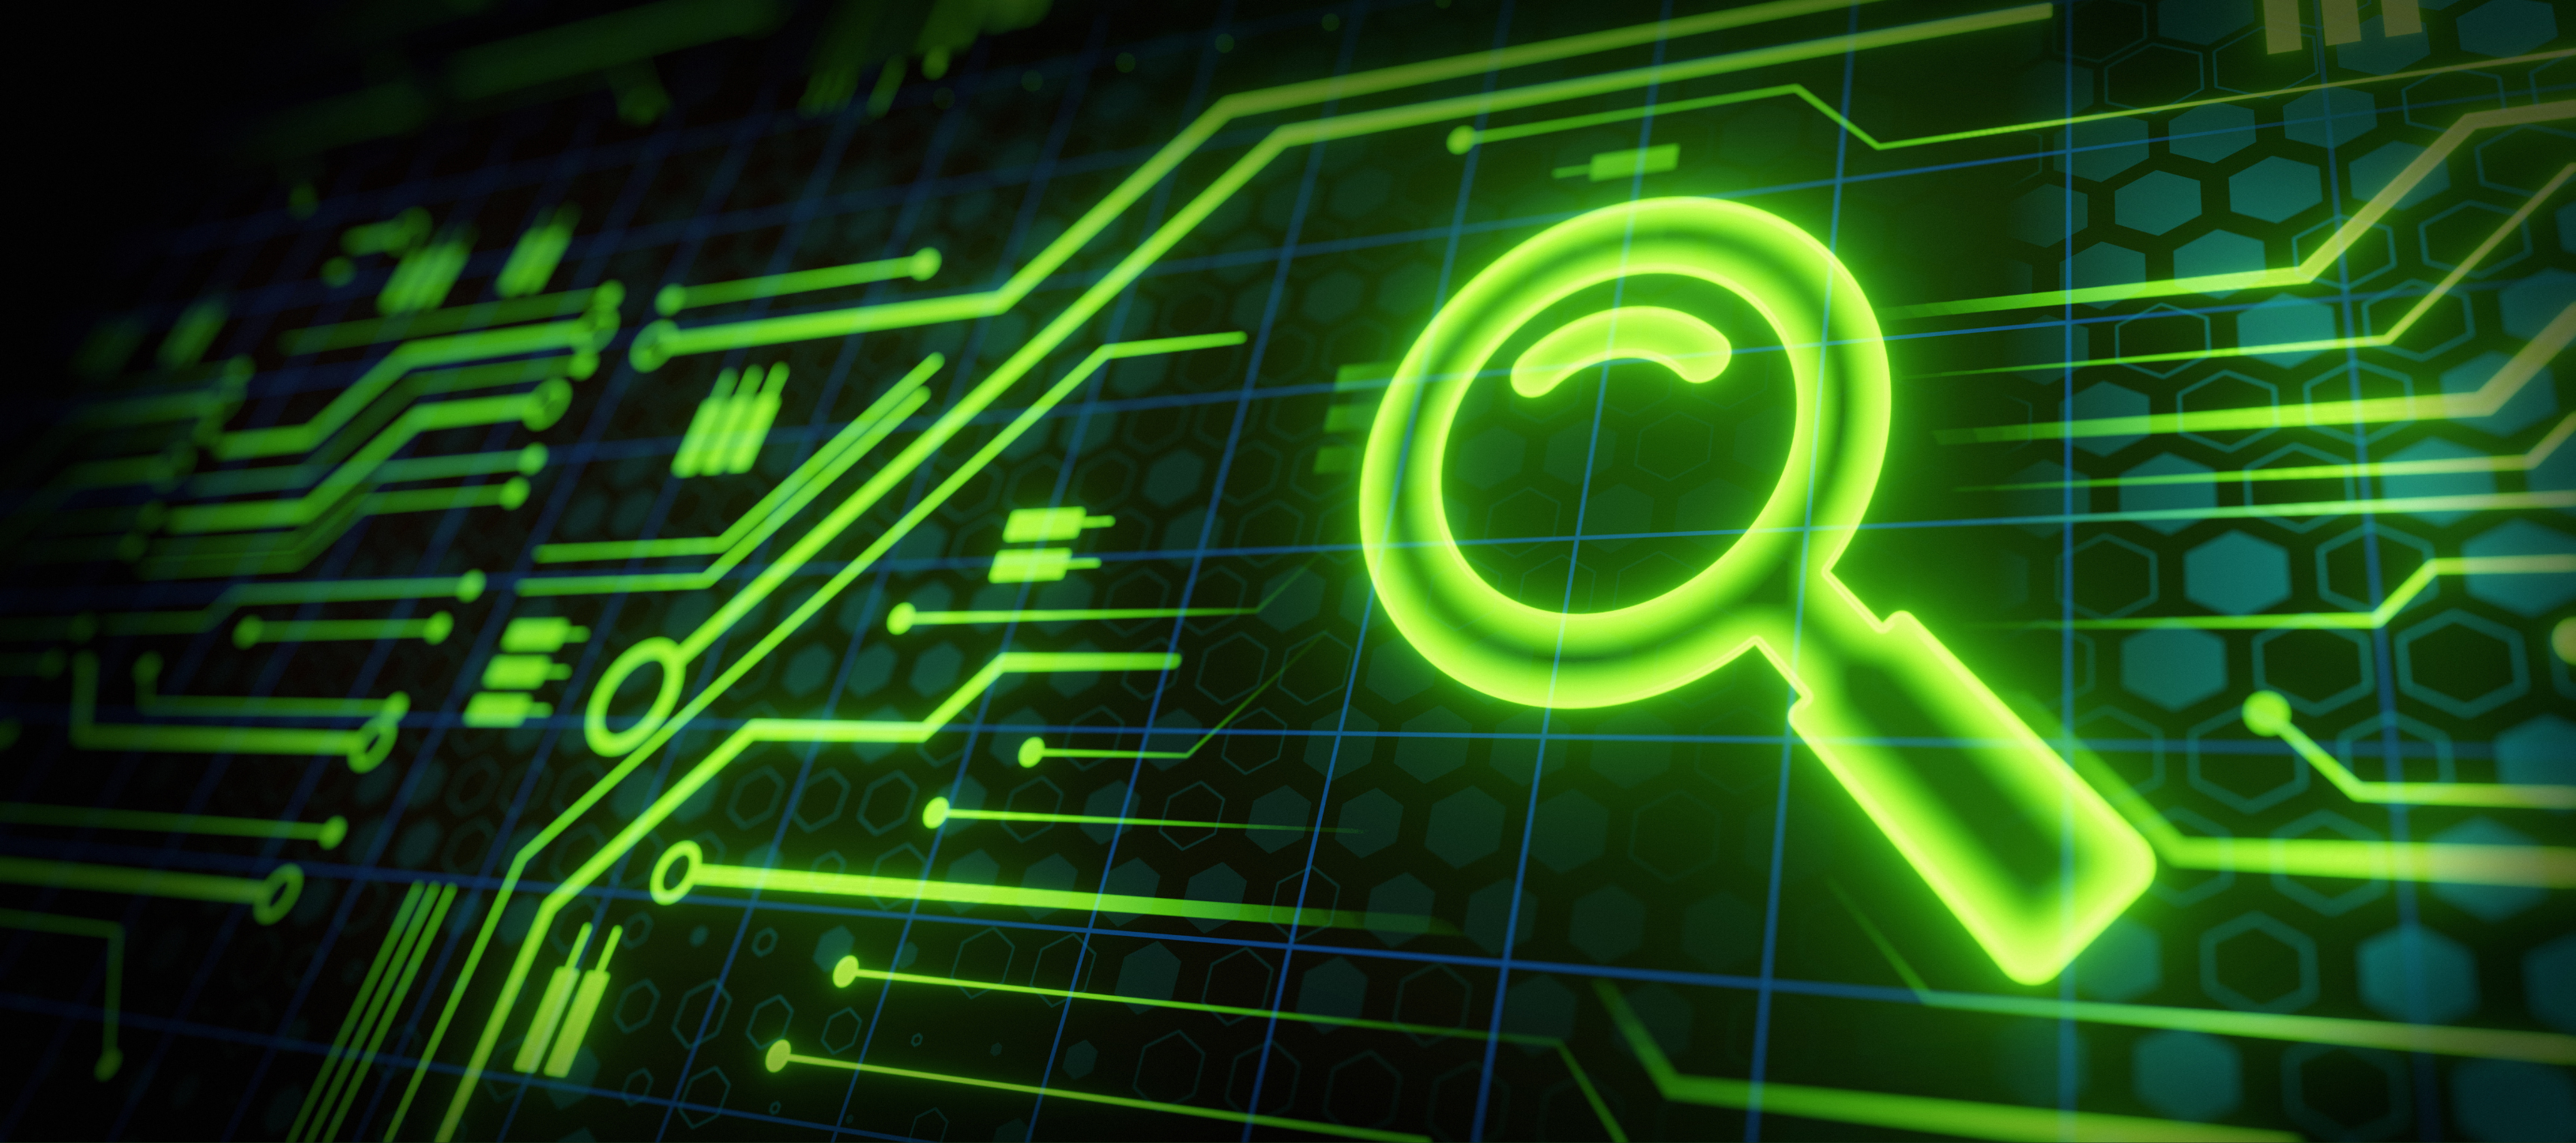 Graphic illustration of a magnifying glass icon on a circuitry background.